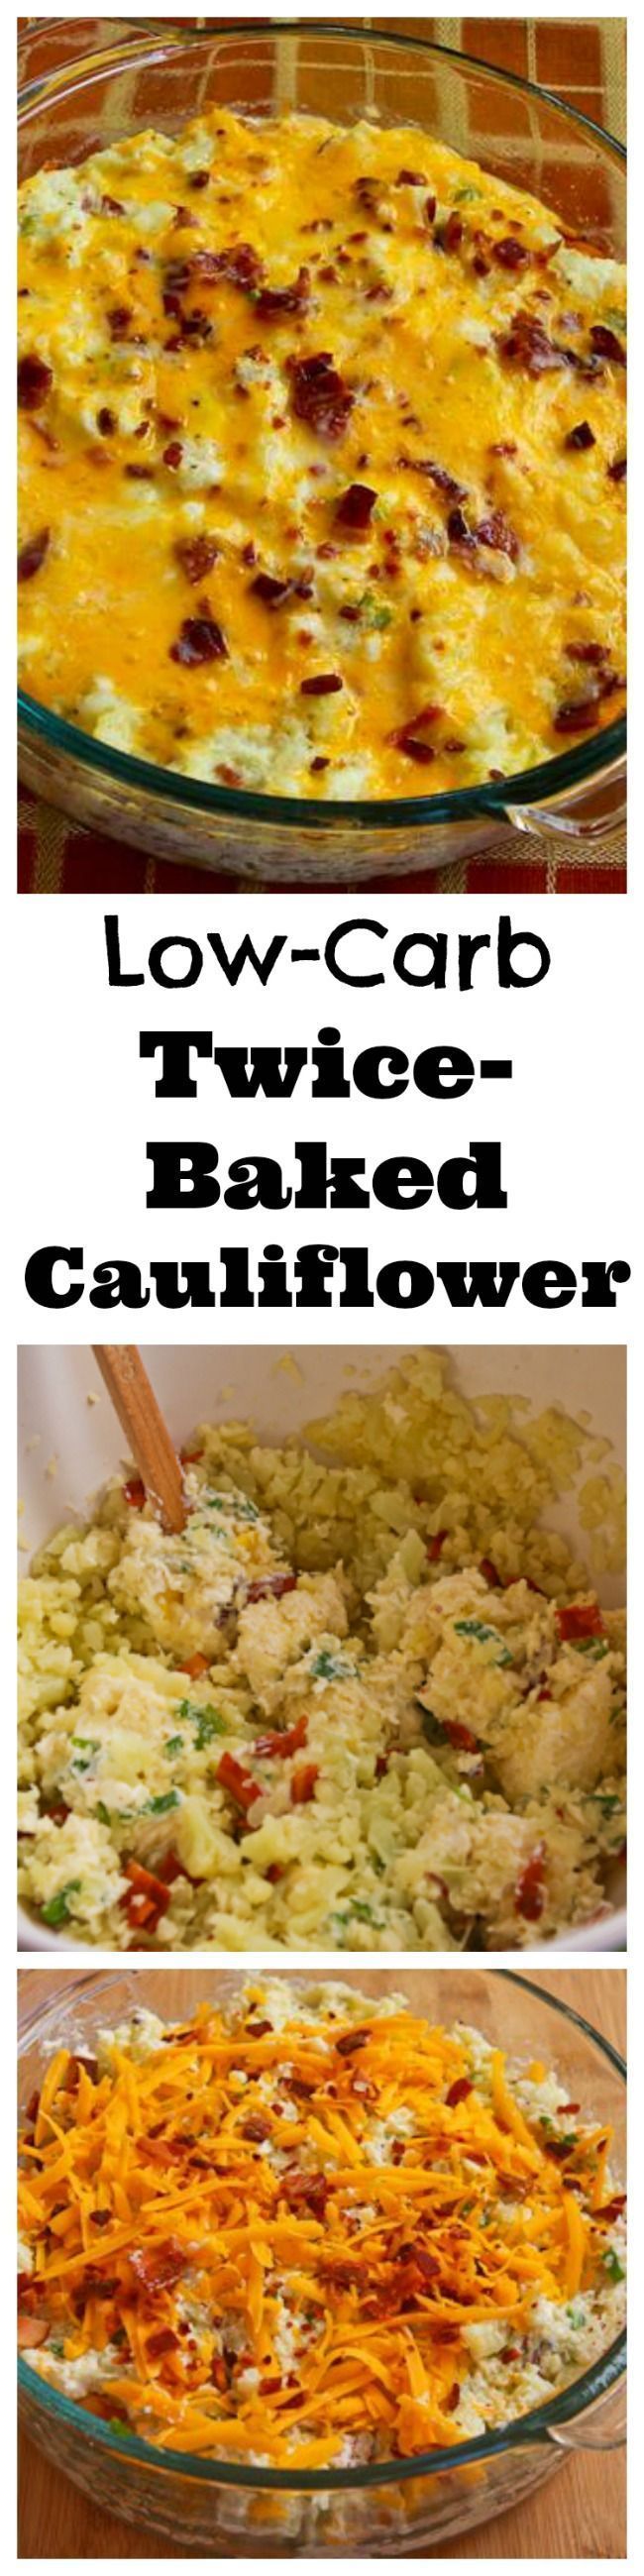 This Low-Carb Twice Baked Cauliflower Casserole tastes like twice-baked potatoes, minus the carbs.  This recipe has been pinned